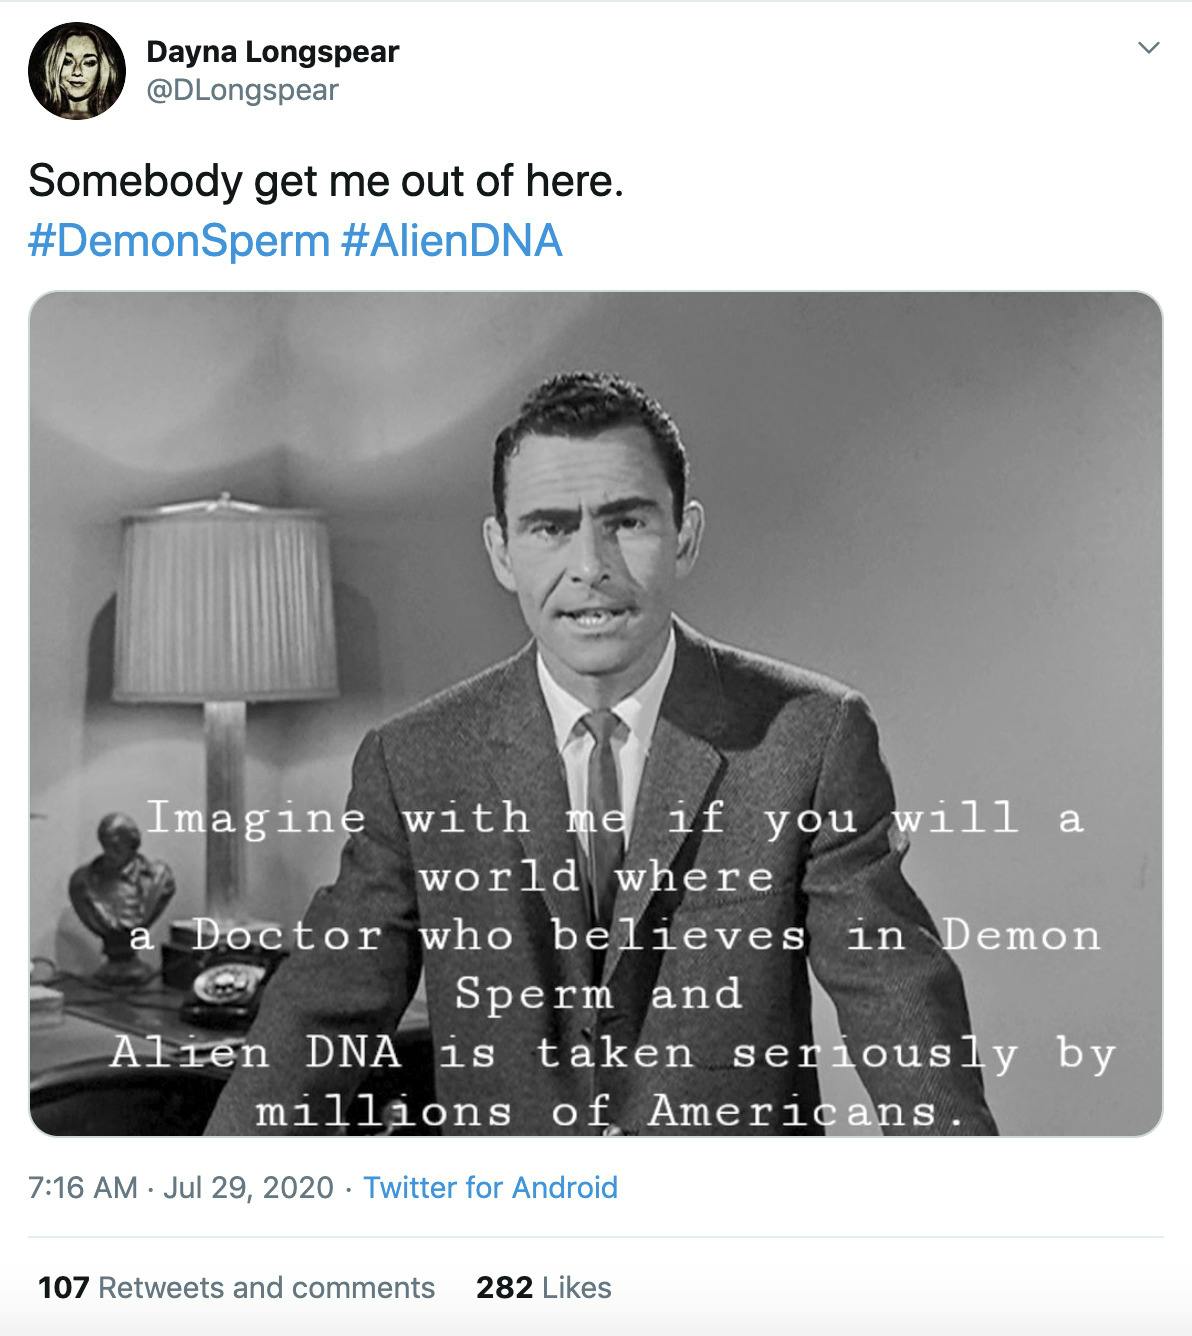 "Somebody get me out of here. #DemonSperm #AlienDNA" image of the narrator from the Twilight Zone saying "imagine with me if you will a world where a doctor believes in demen semen and alien DNA and is taken seriously by millions of Americans"